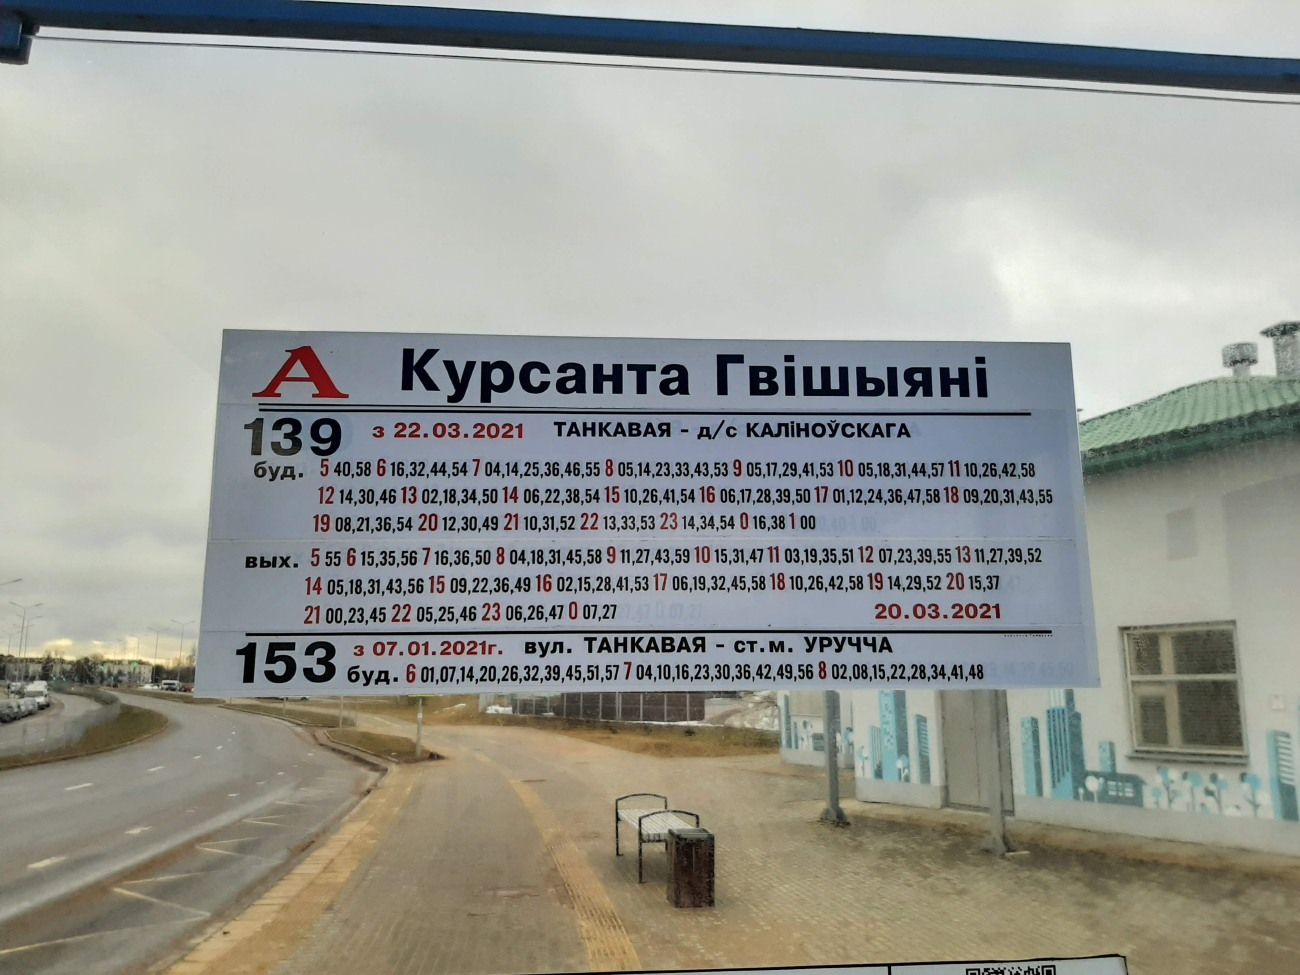 Minsk — Timetables and stop plates